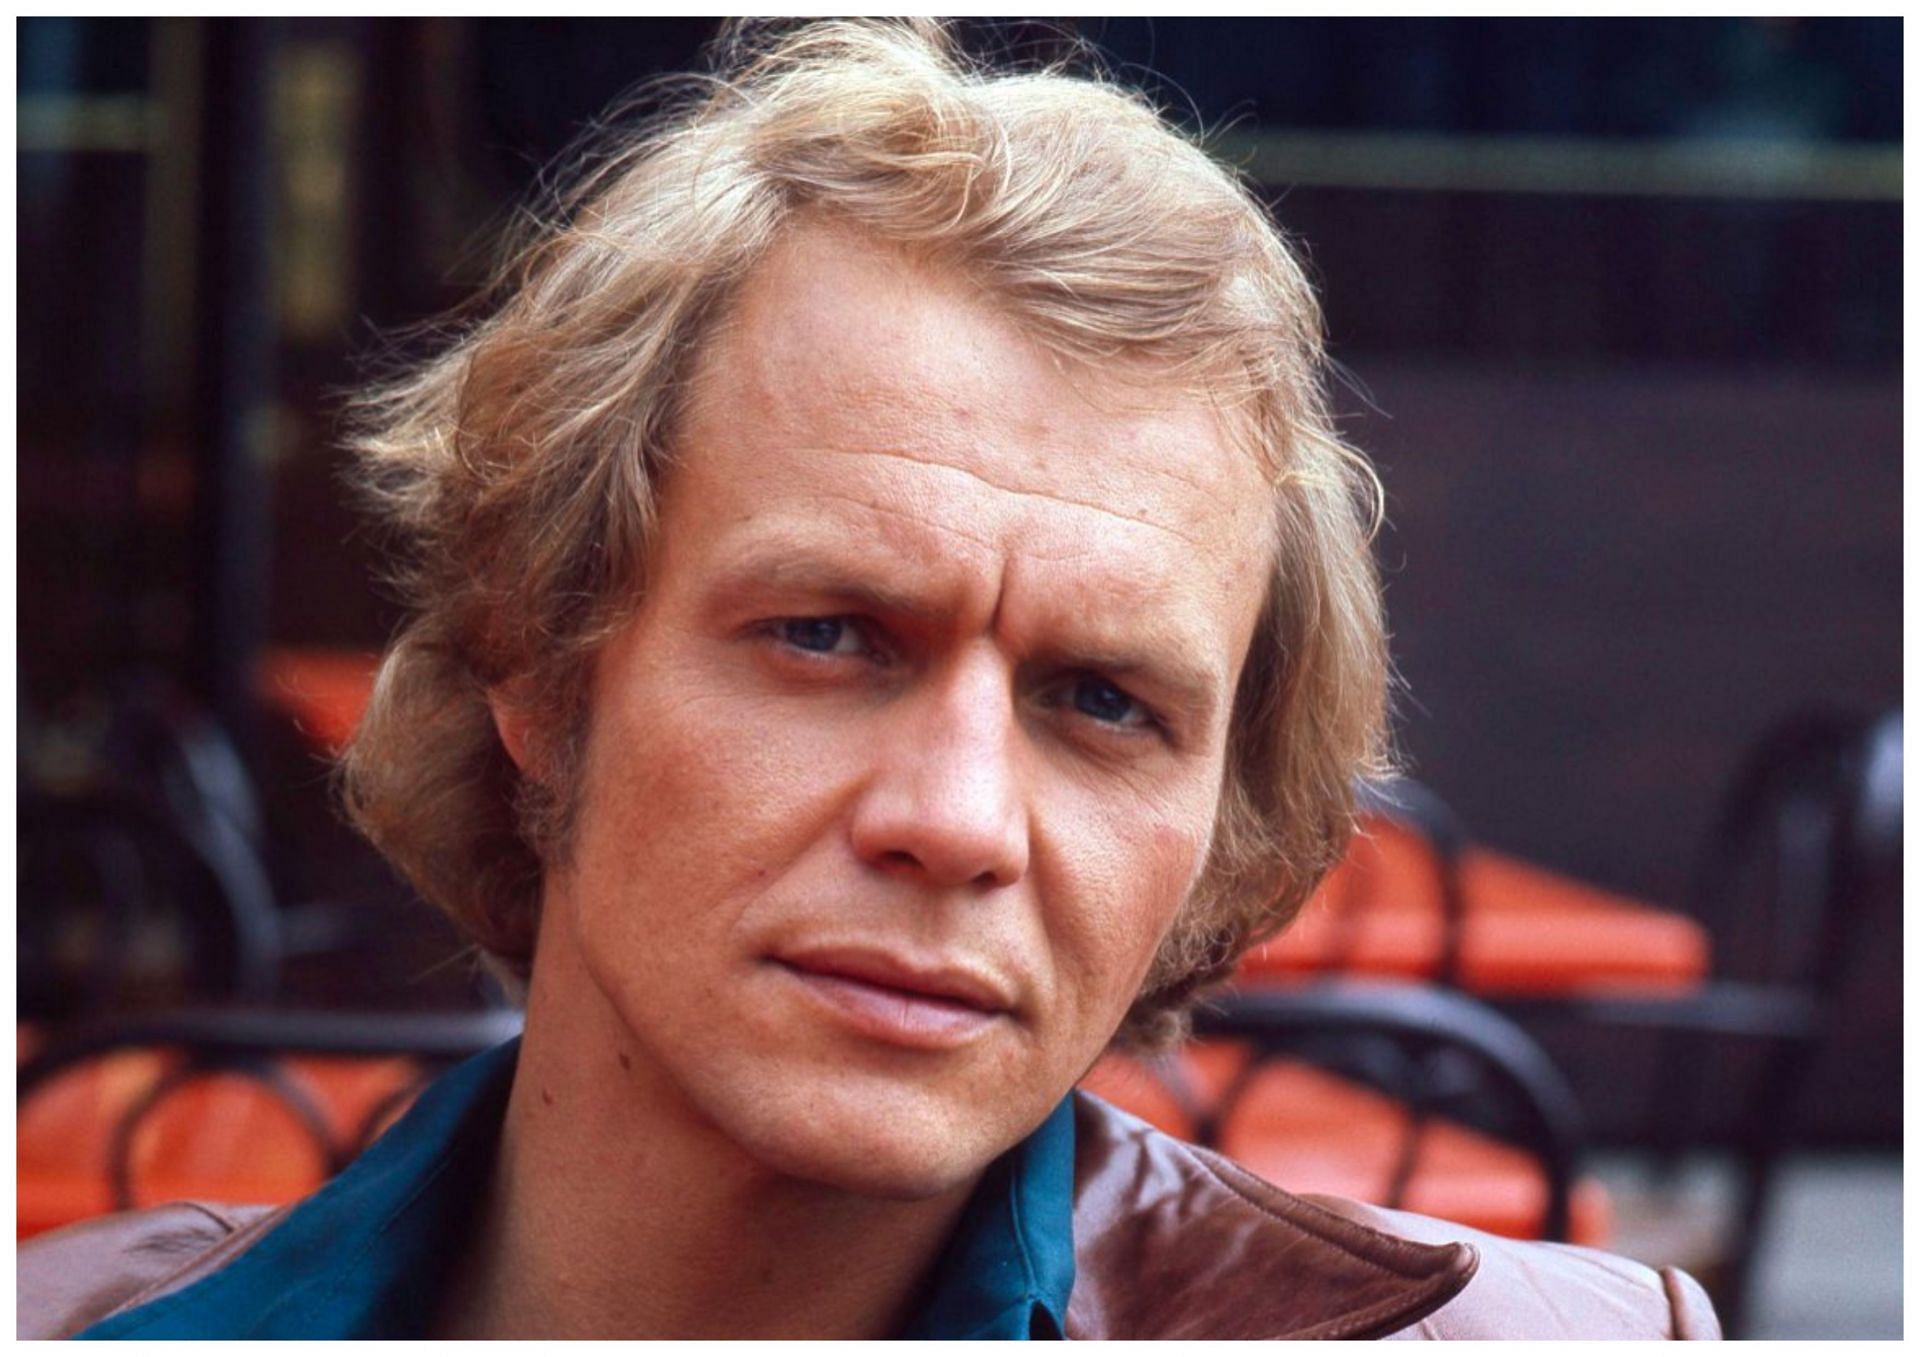 &ldquo;Starsky and Hutch&rdquo; star David Soul passes away at the age of 80